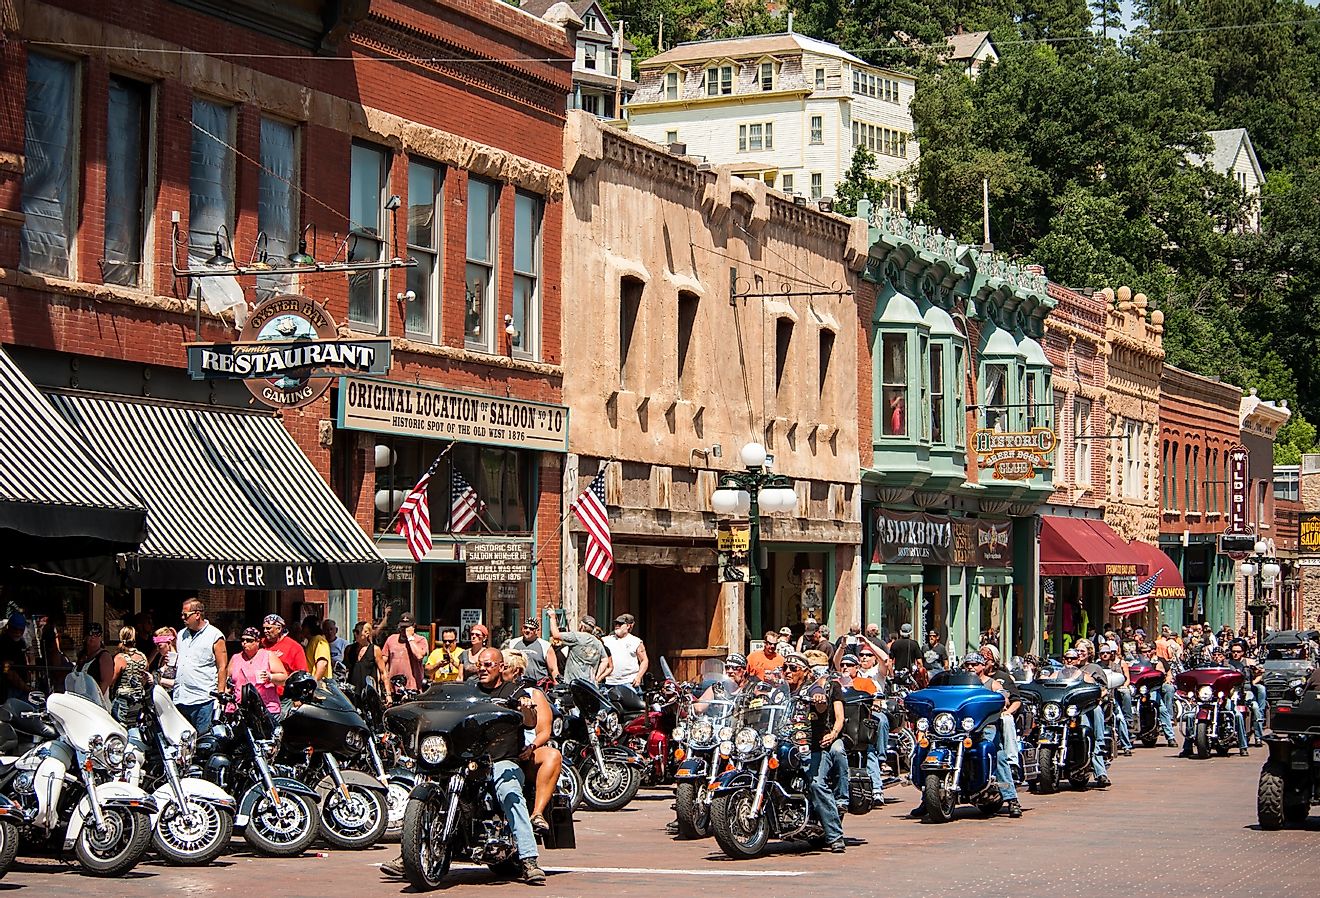 Sturgis, South Dakota town during the annual rally for bikers in the summer. Image credit Photostravellers via Shutterstock.com